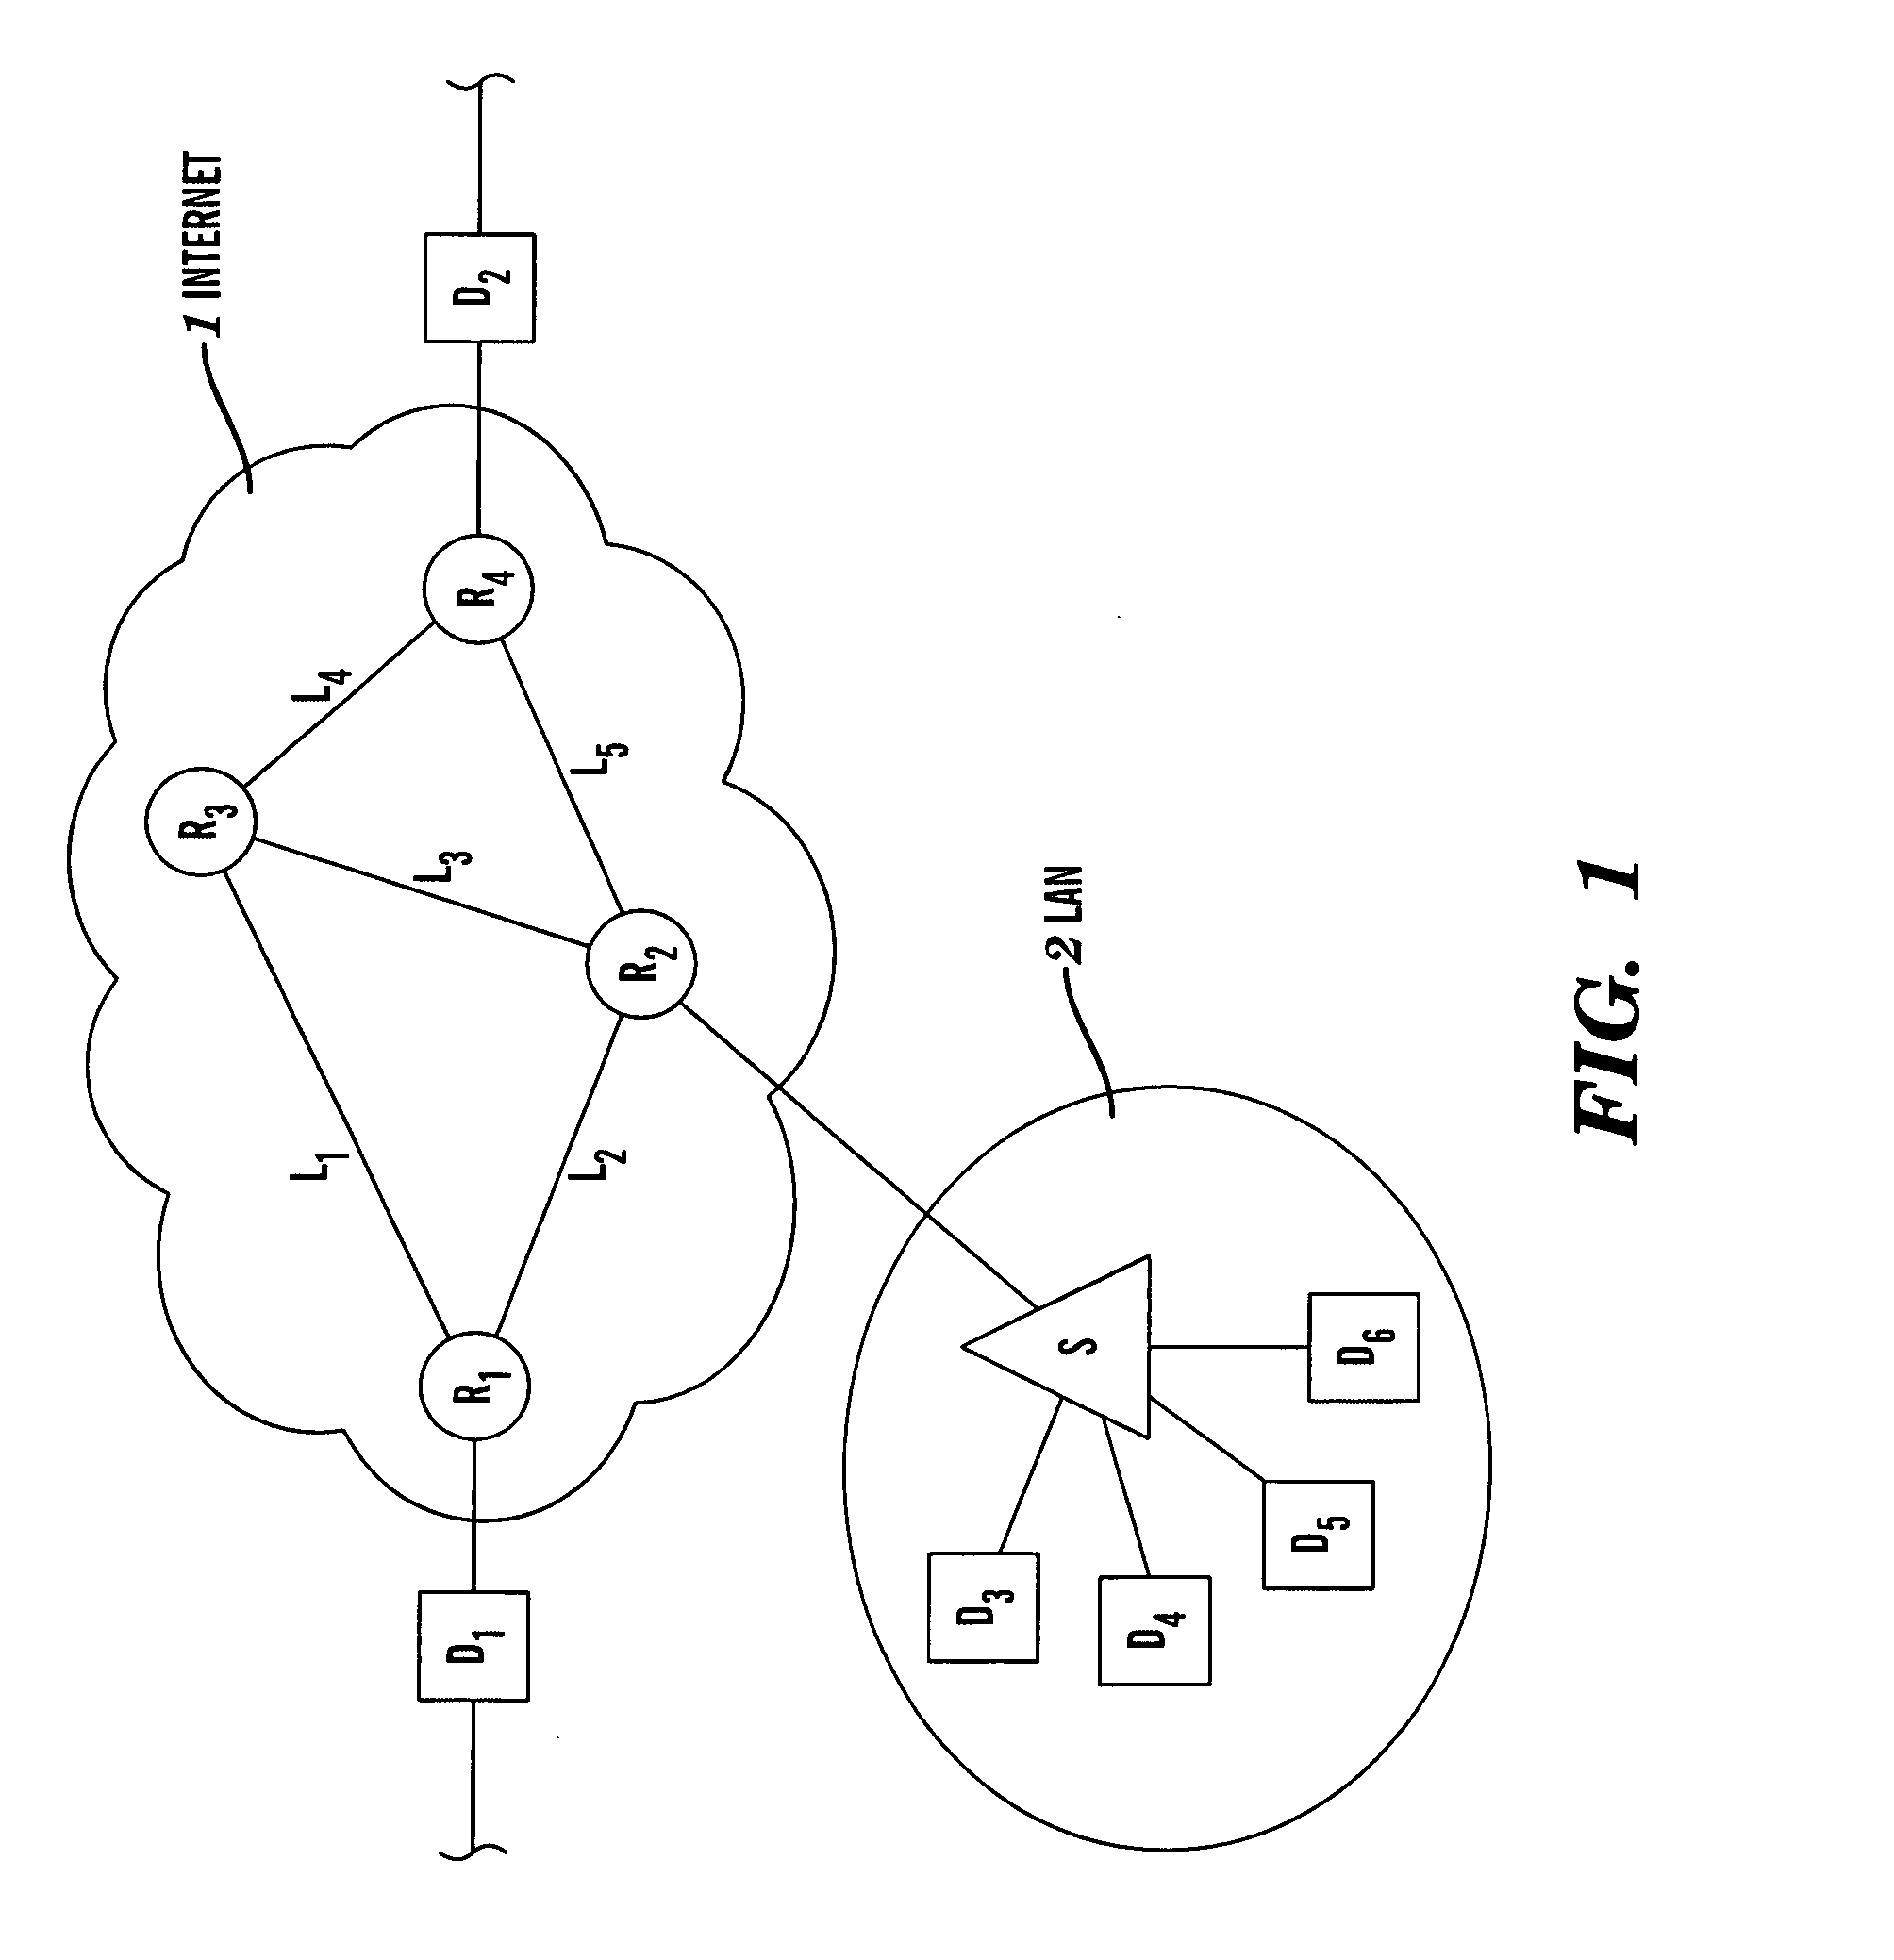 Internet protocol switch and use of the switch for switching a frame